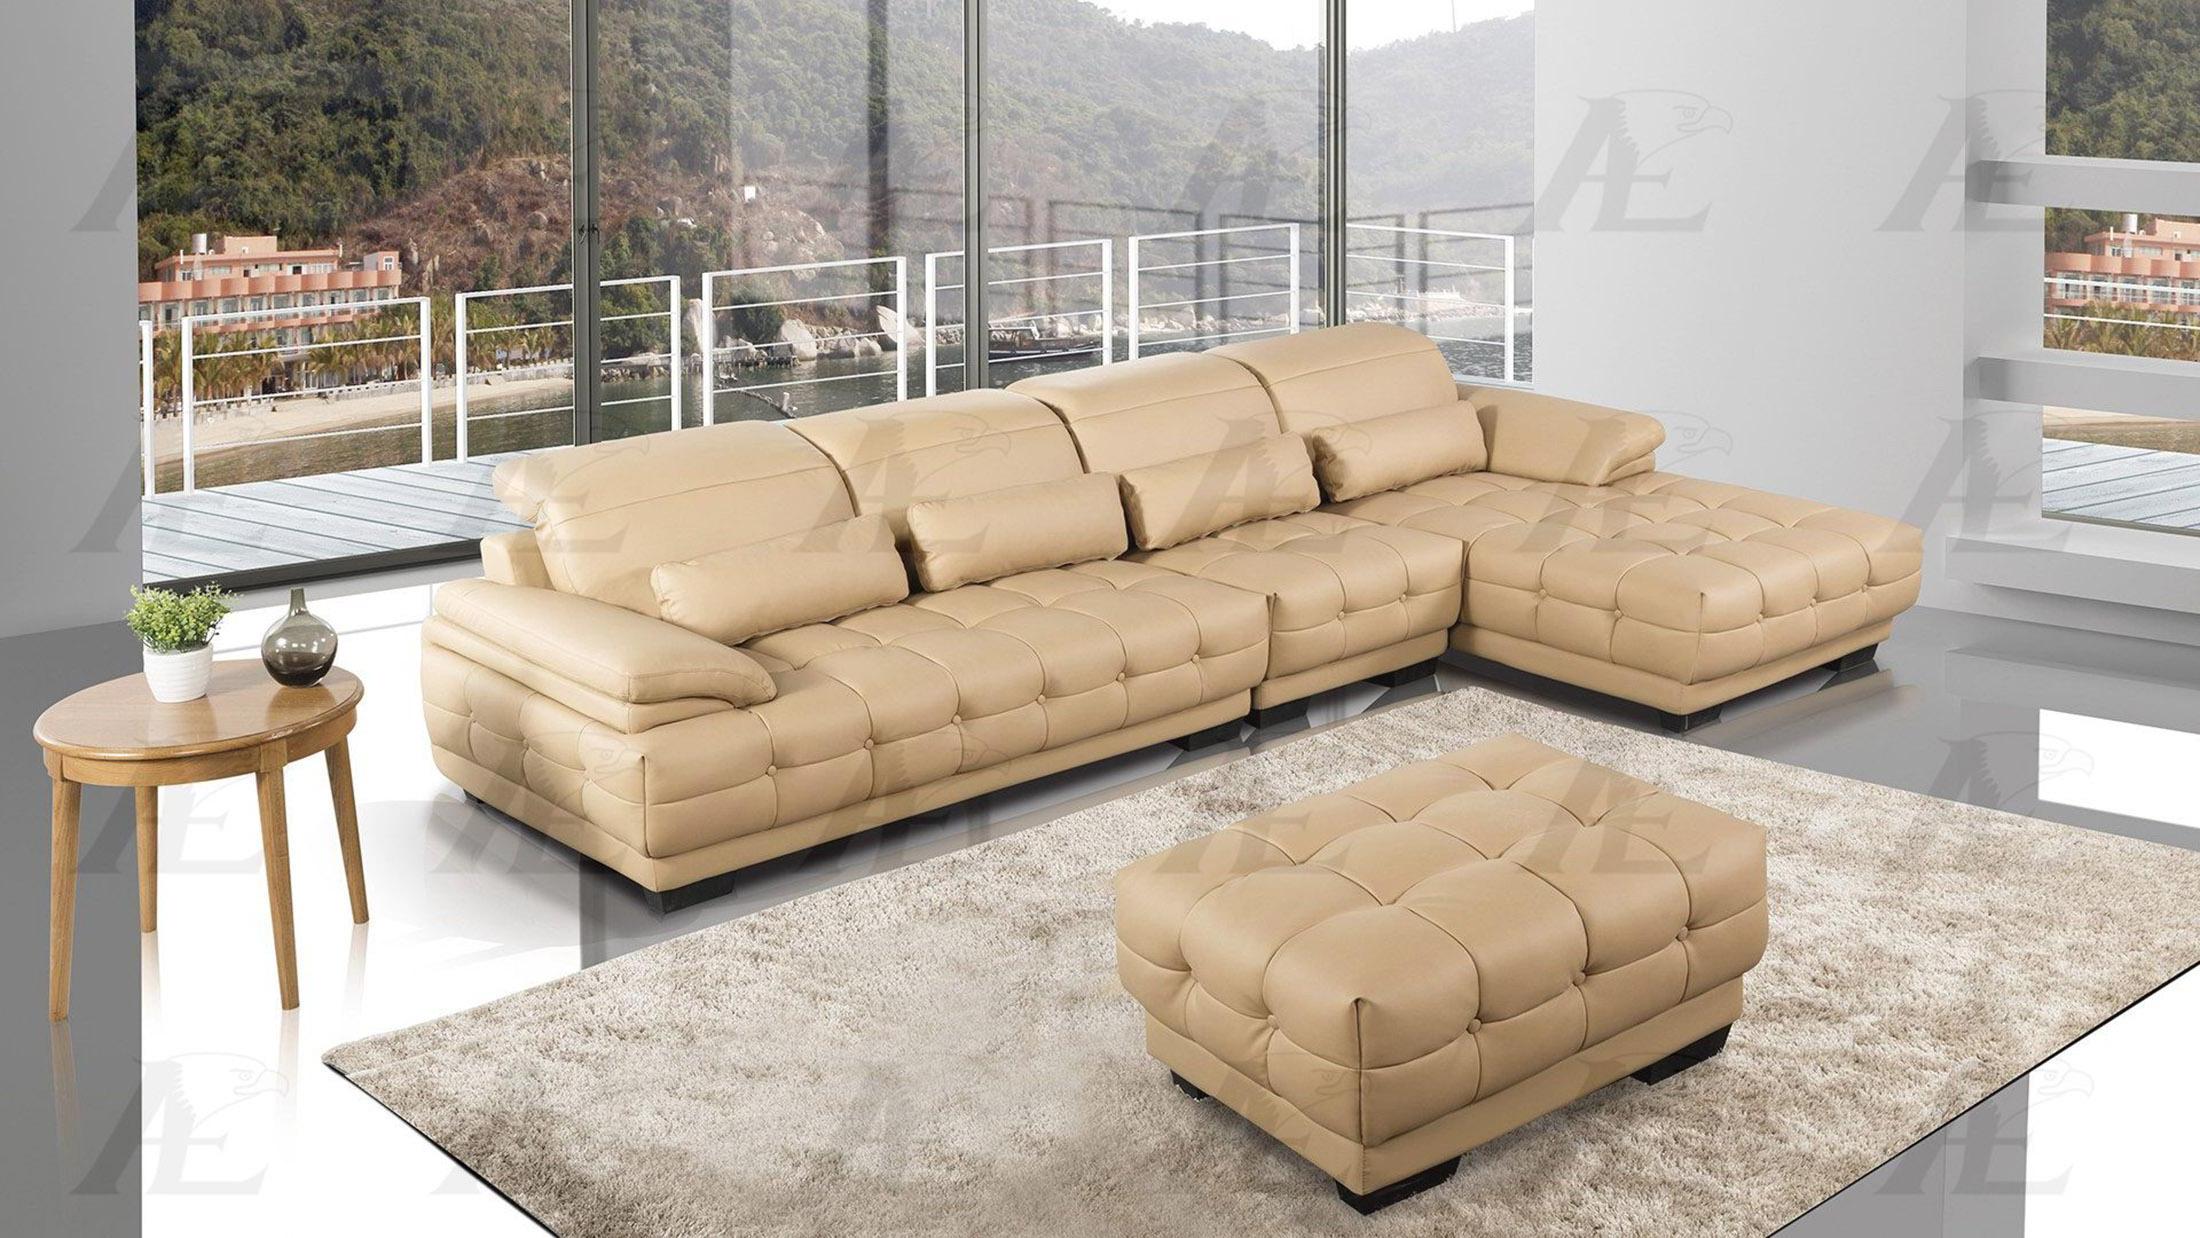 

    
American Eagle Furniture AE-L296-CA Camel Sofa Chaise Chair and Ottoman Set Right Hand Chase Bonded Leather 4Pcs
